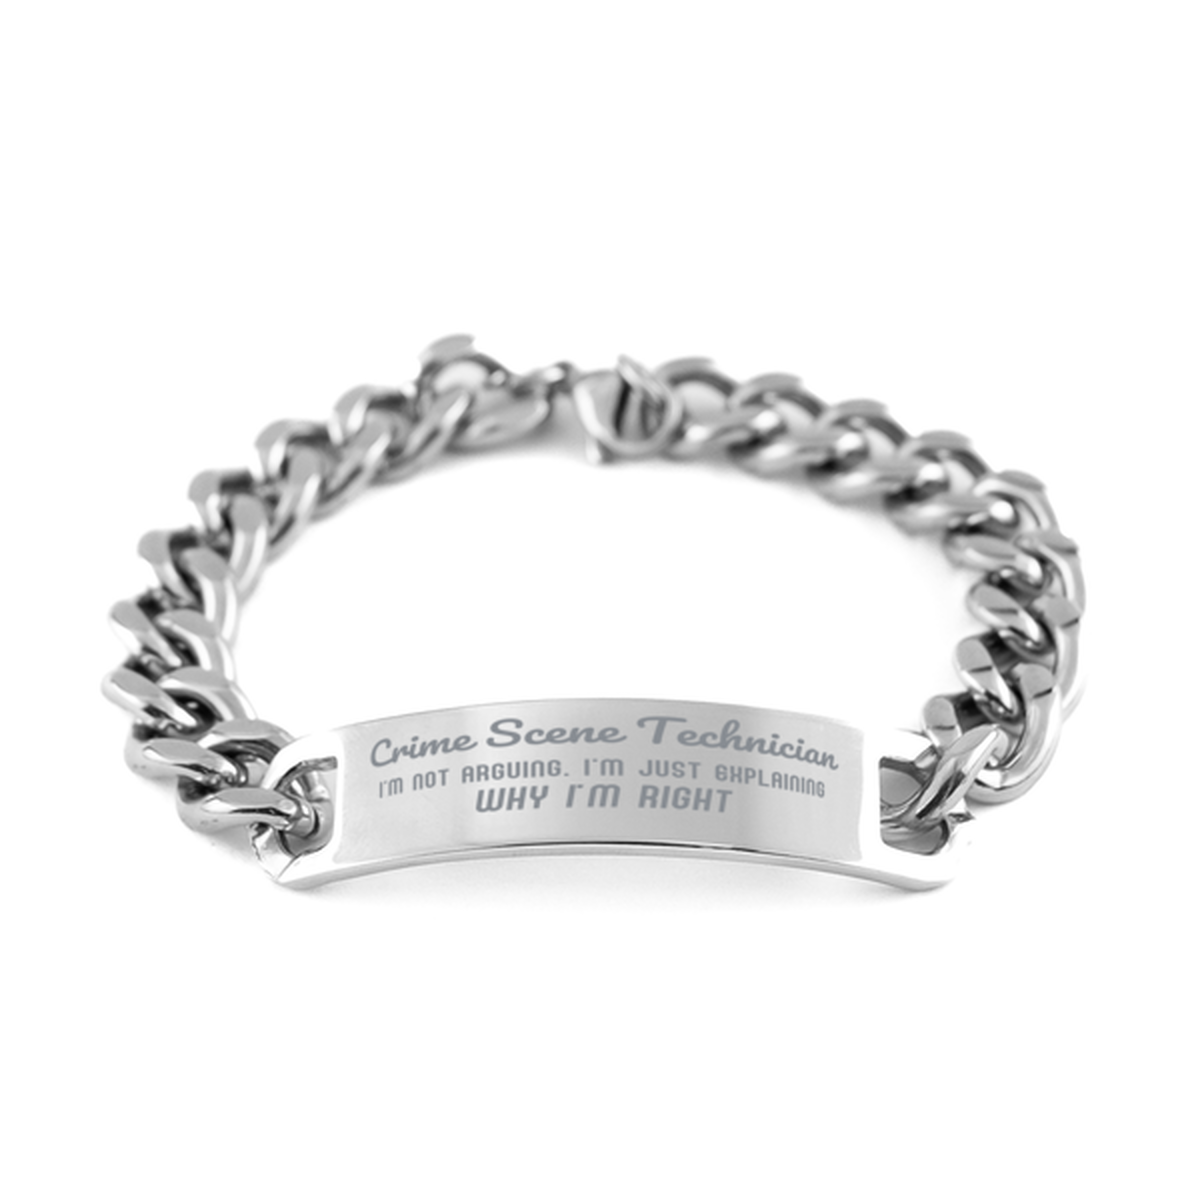 Crime Scene Technician I'm not Arguing. I'm Just Explaining Why I'm RIGHT Cuban Chain Stainless Steel Bracelet, Graduation Birthday Christmas Crime Scene Technician Gifts For Crime Scene Technician Funny Saying Quote Present for Men Women Coworker